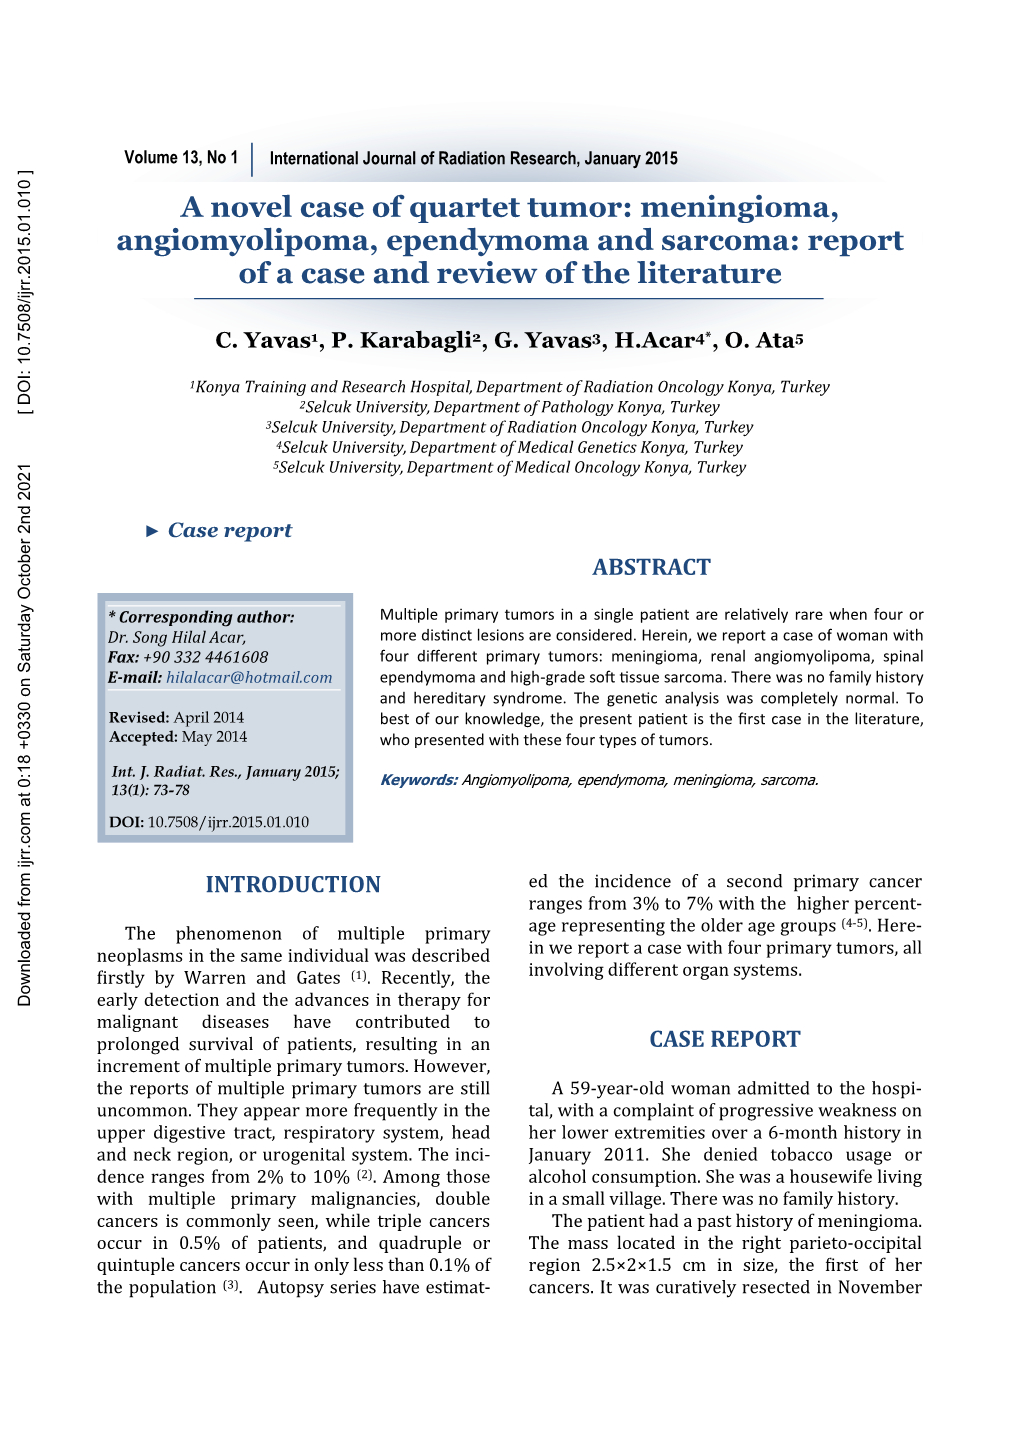 Meningioma, Angiomyolipoma, Ependymoma and Sarcoma: Report of a Case and Review of the Literature